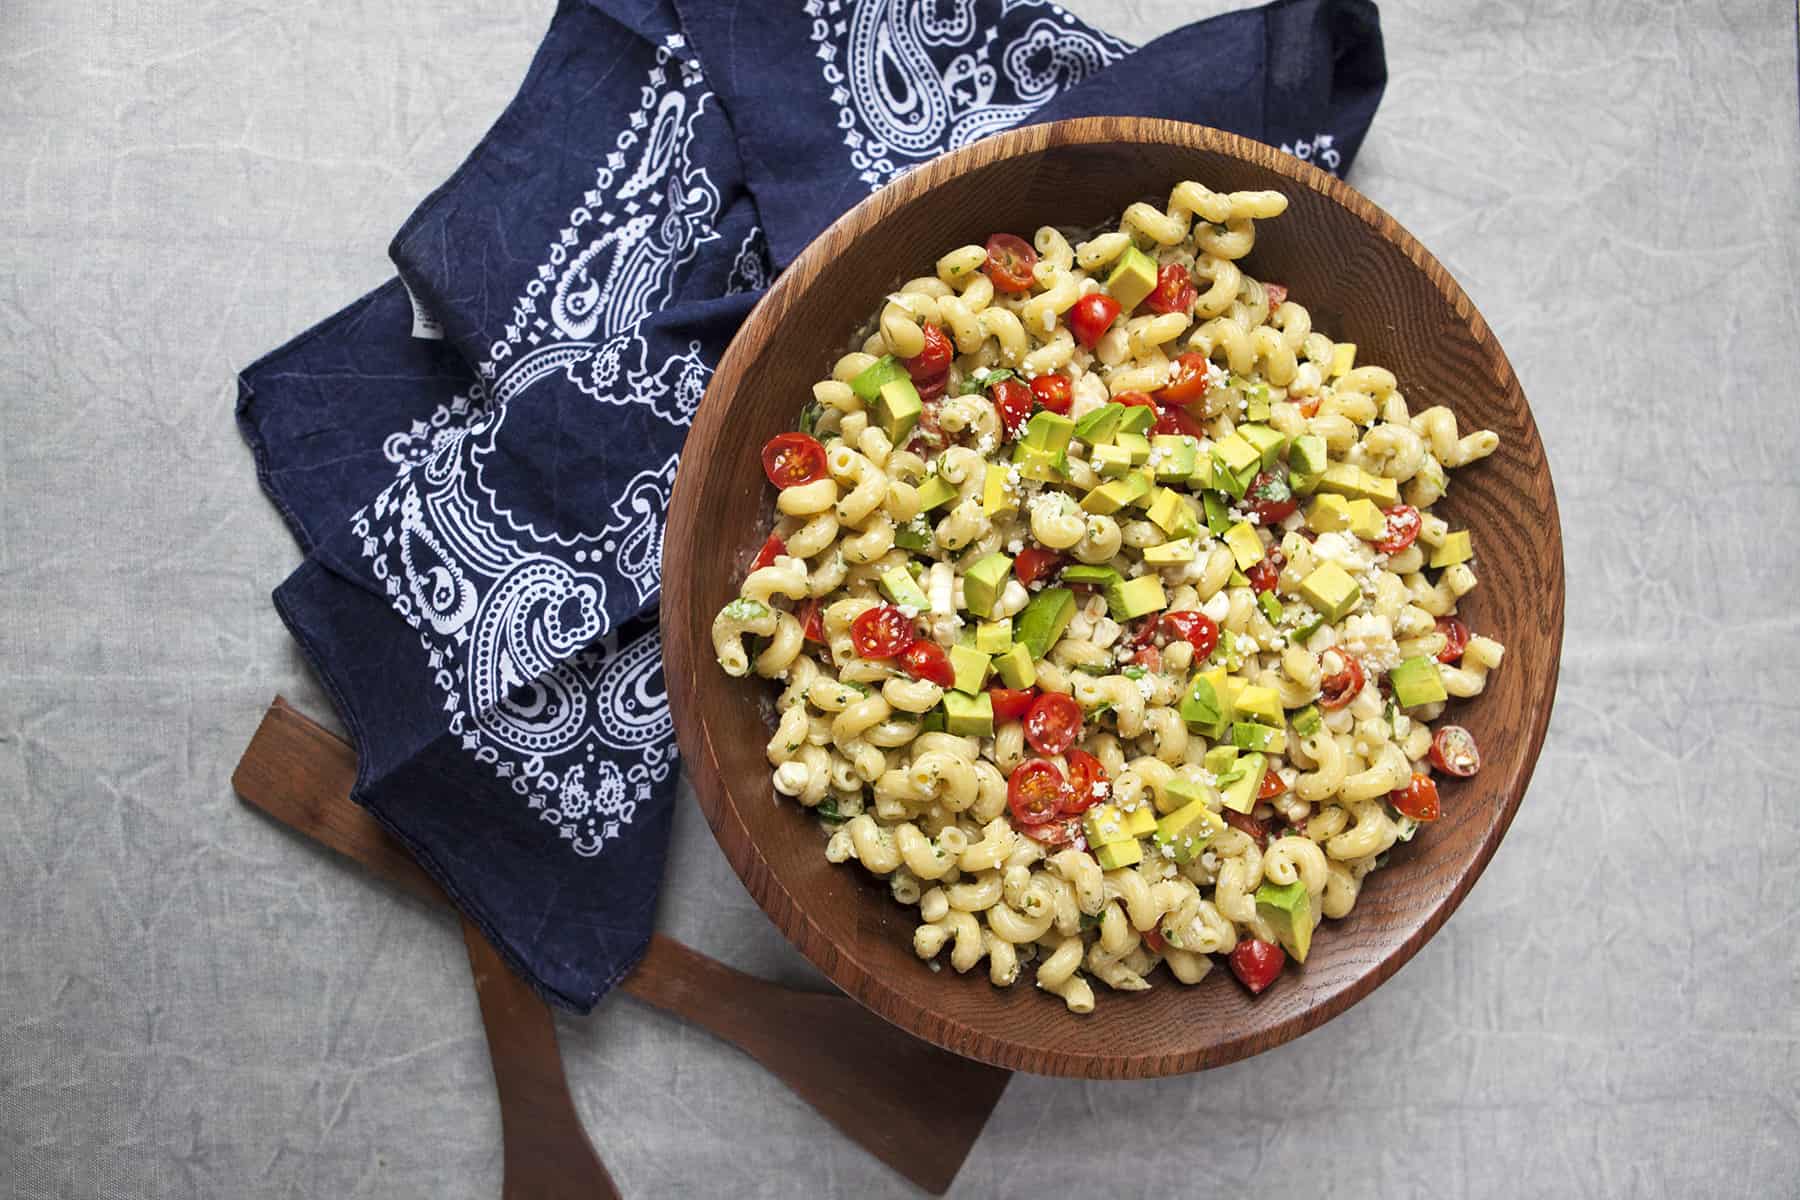 Southwest jalapeno ranch pasta salad in a wooden bowl.